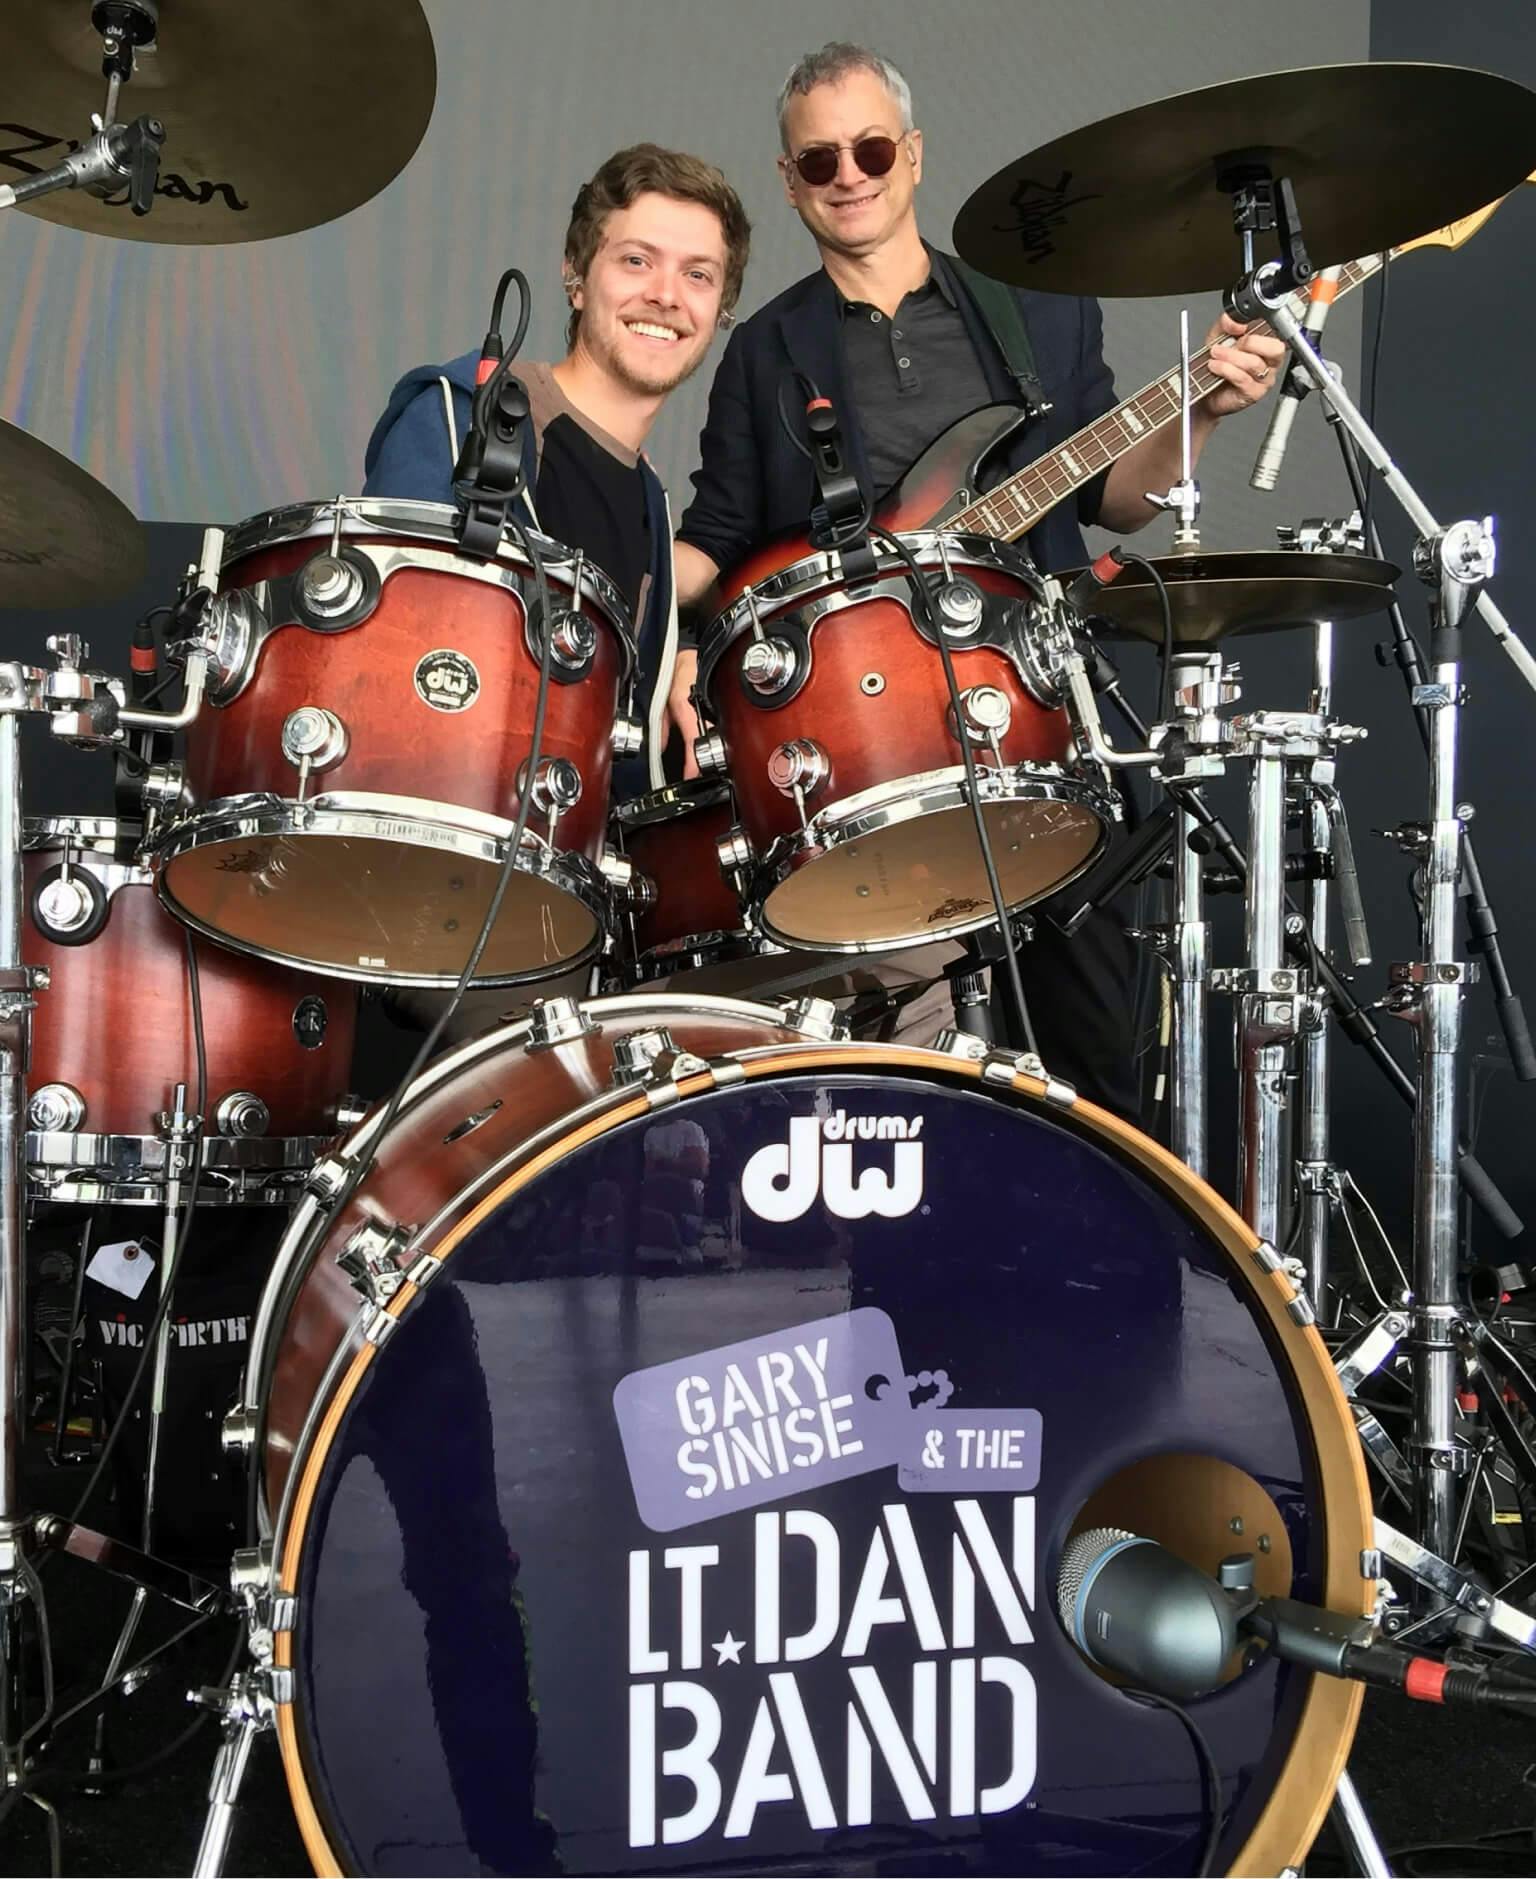 Mac with his father performing with the Lt. Dan Band.